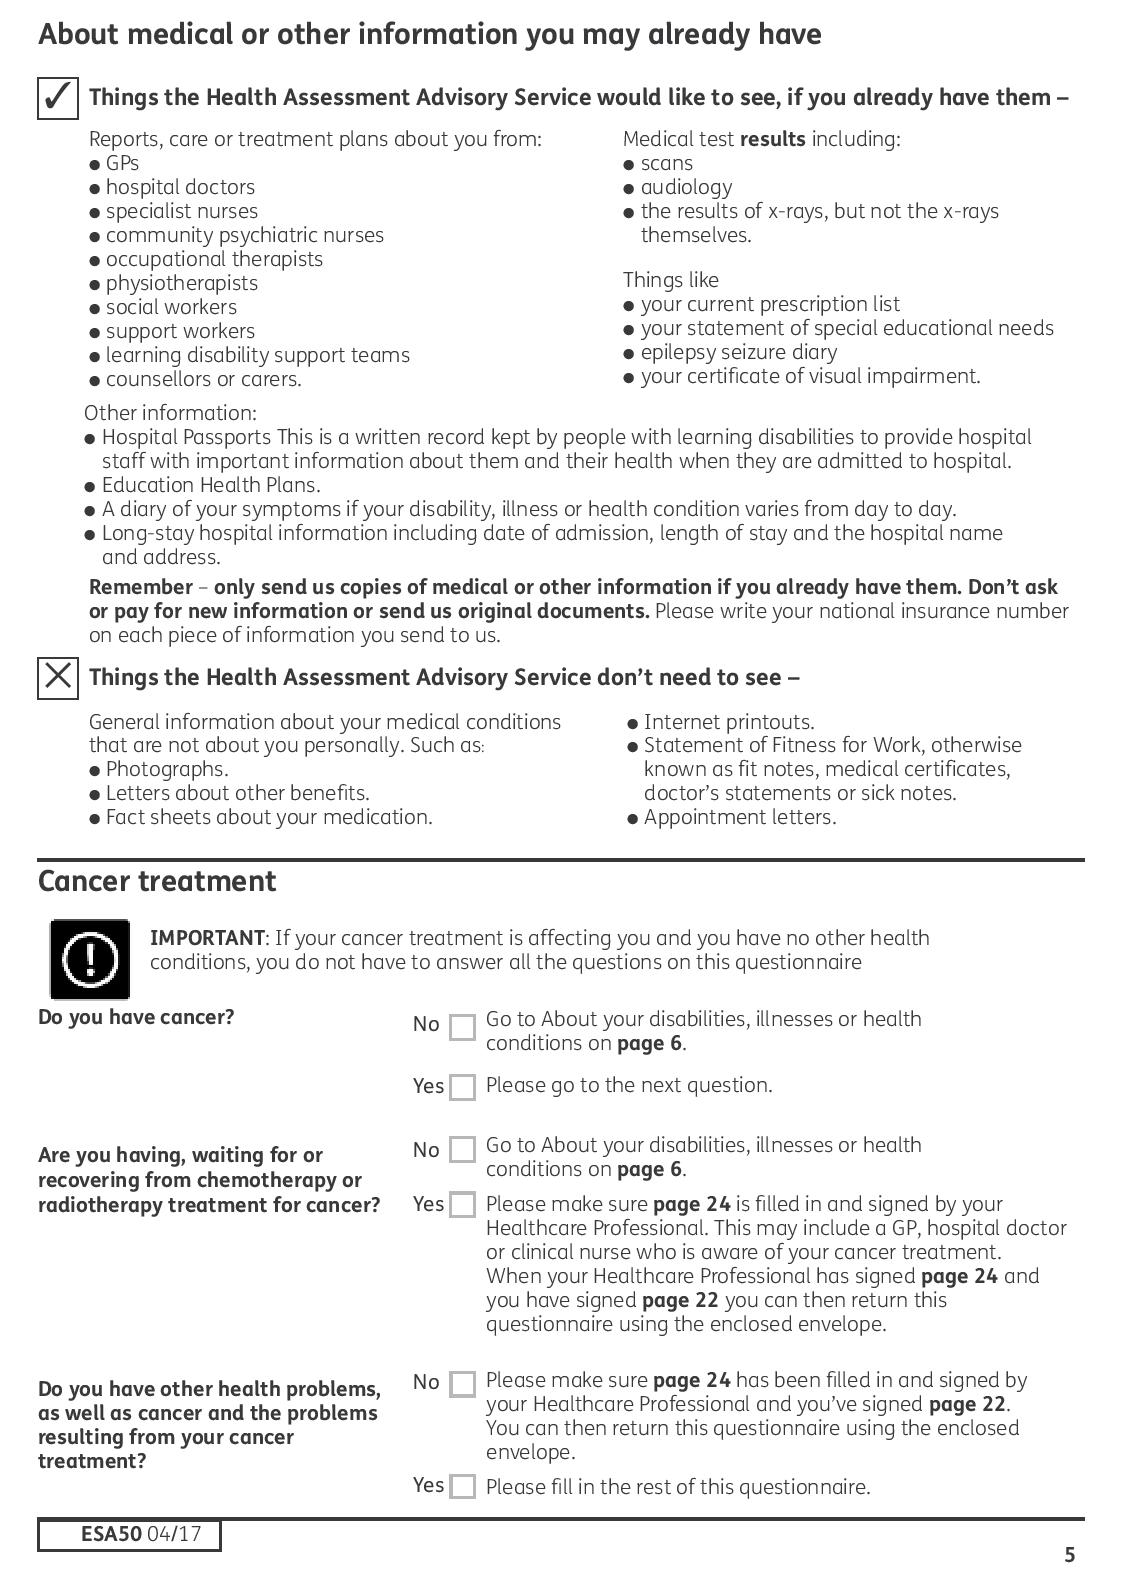 Doctor Appointment Letter For Work from www.citizensadvice.org.uk